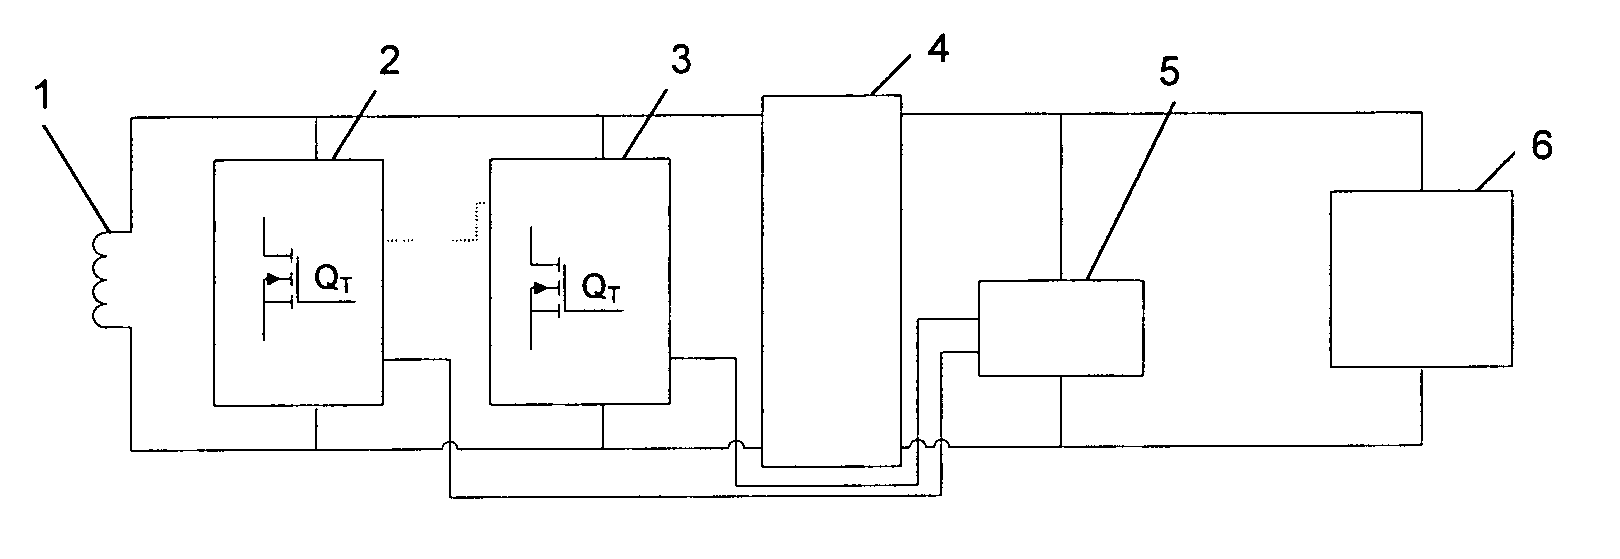 Inductively coupled power receiver and method of operation